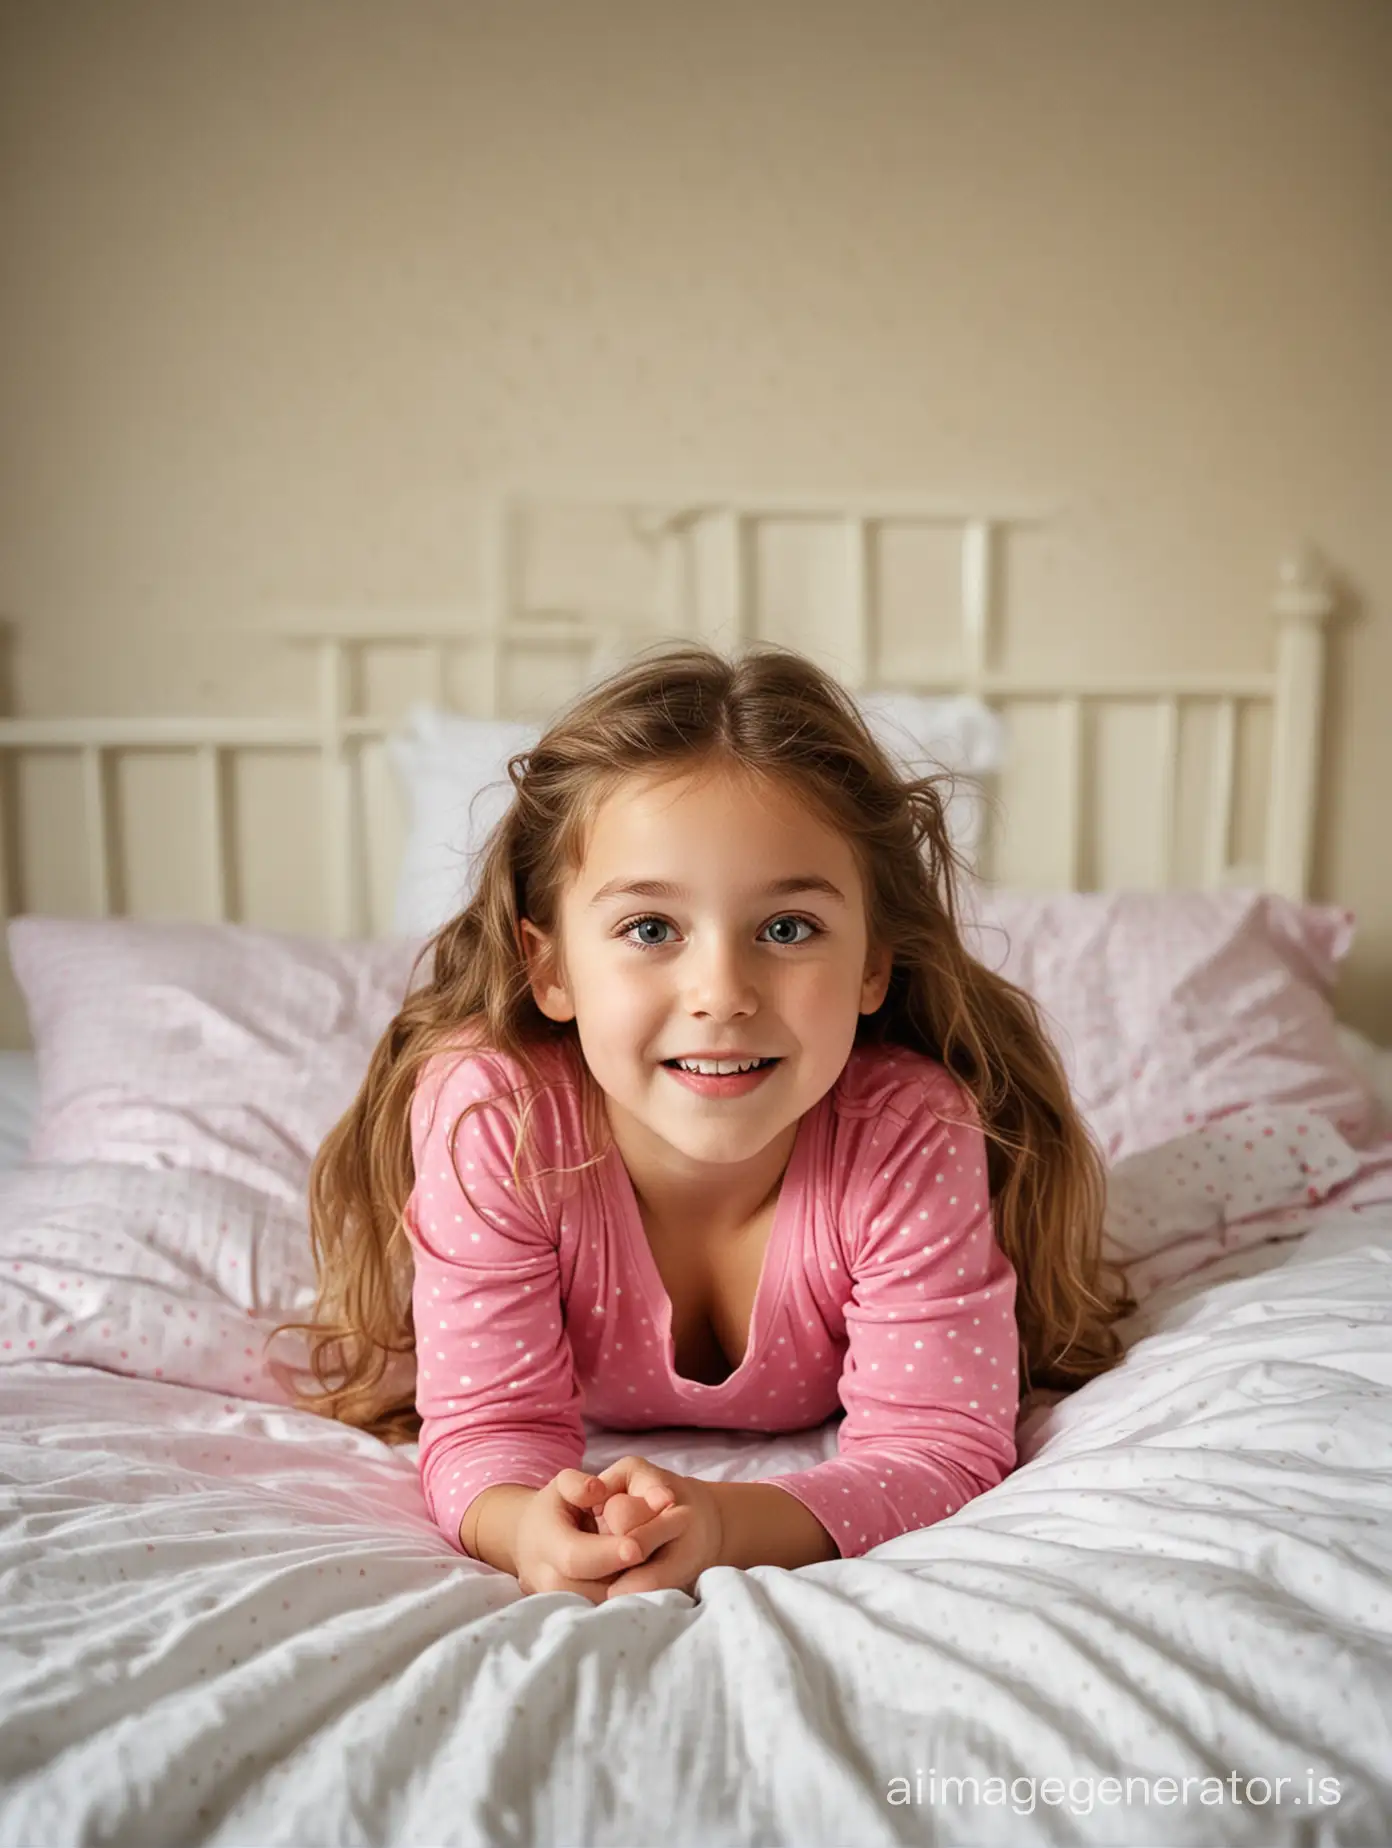 Girl aged 6 playing in bed